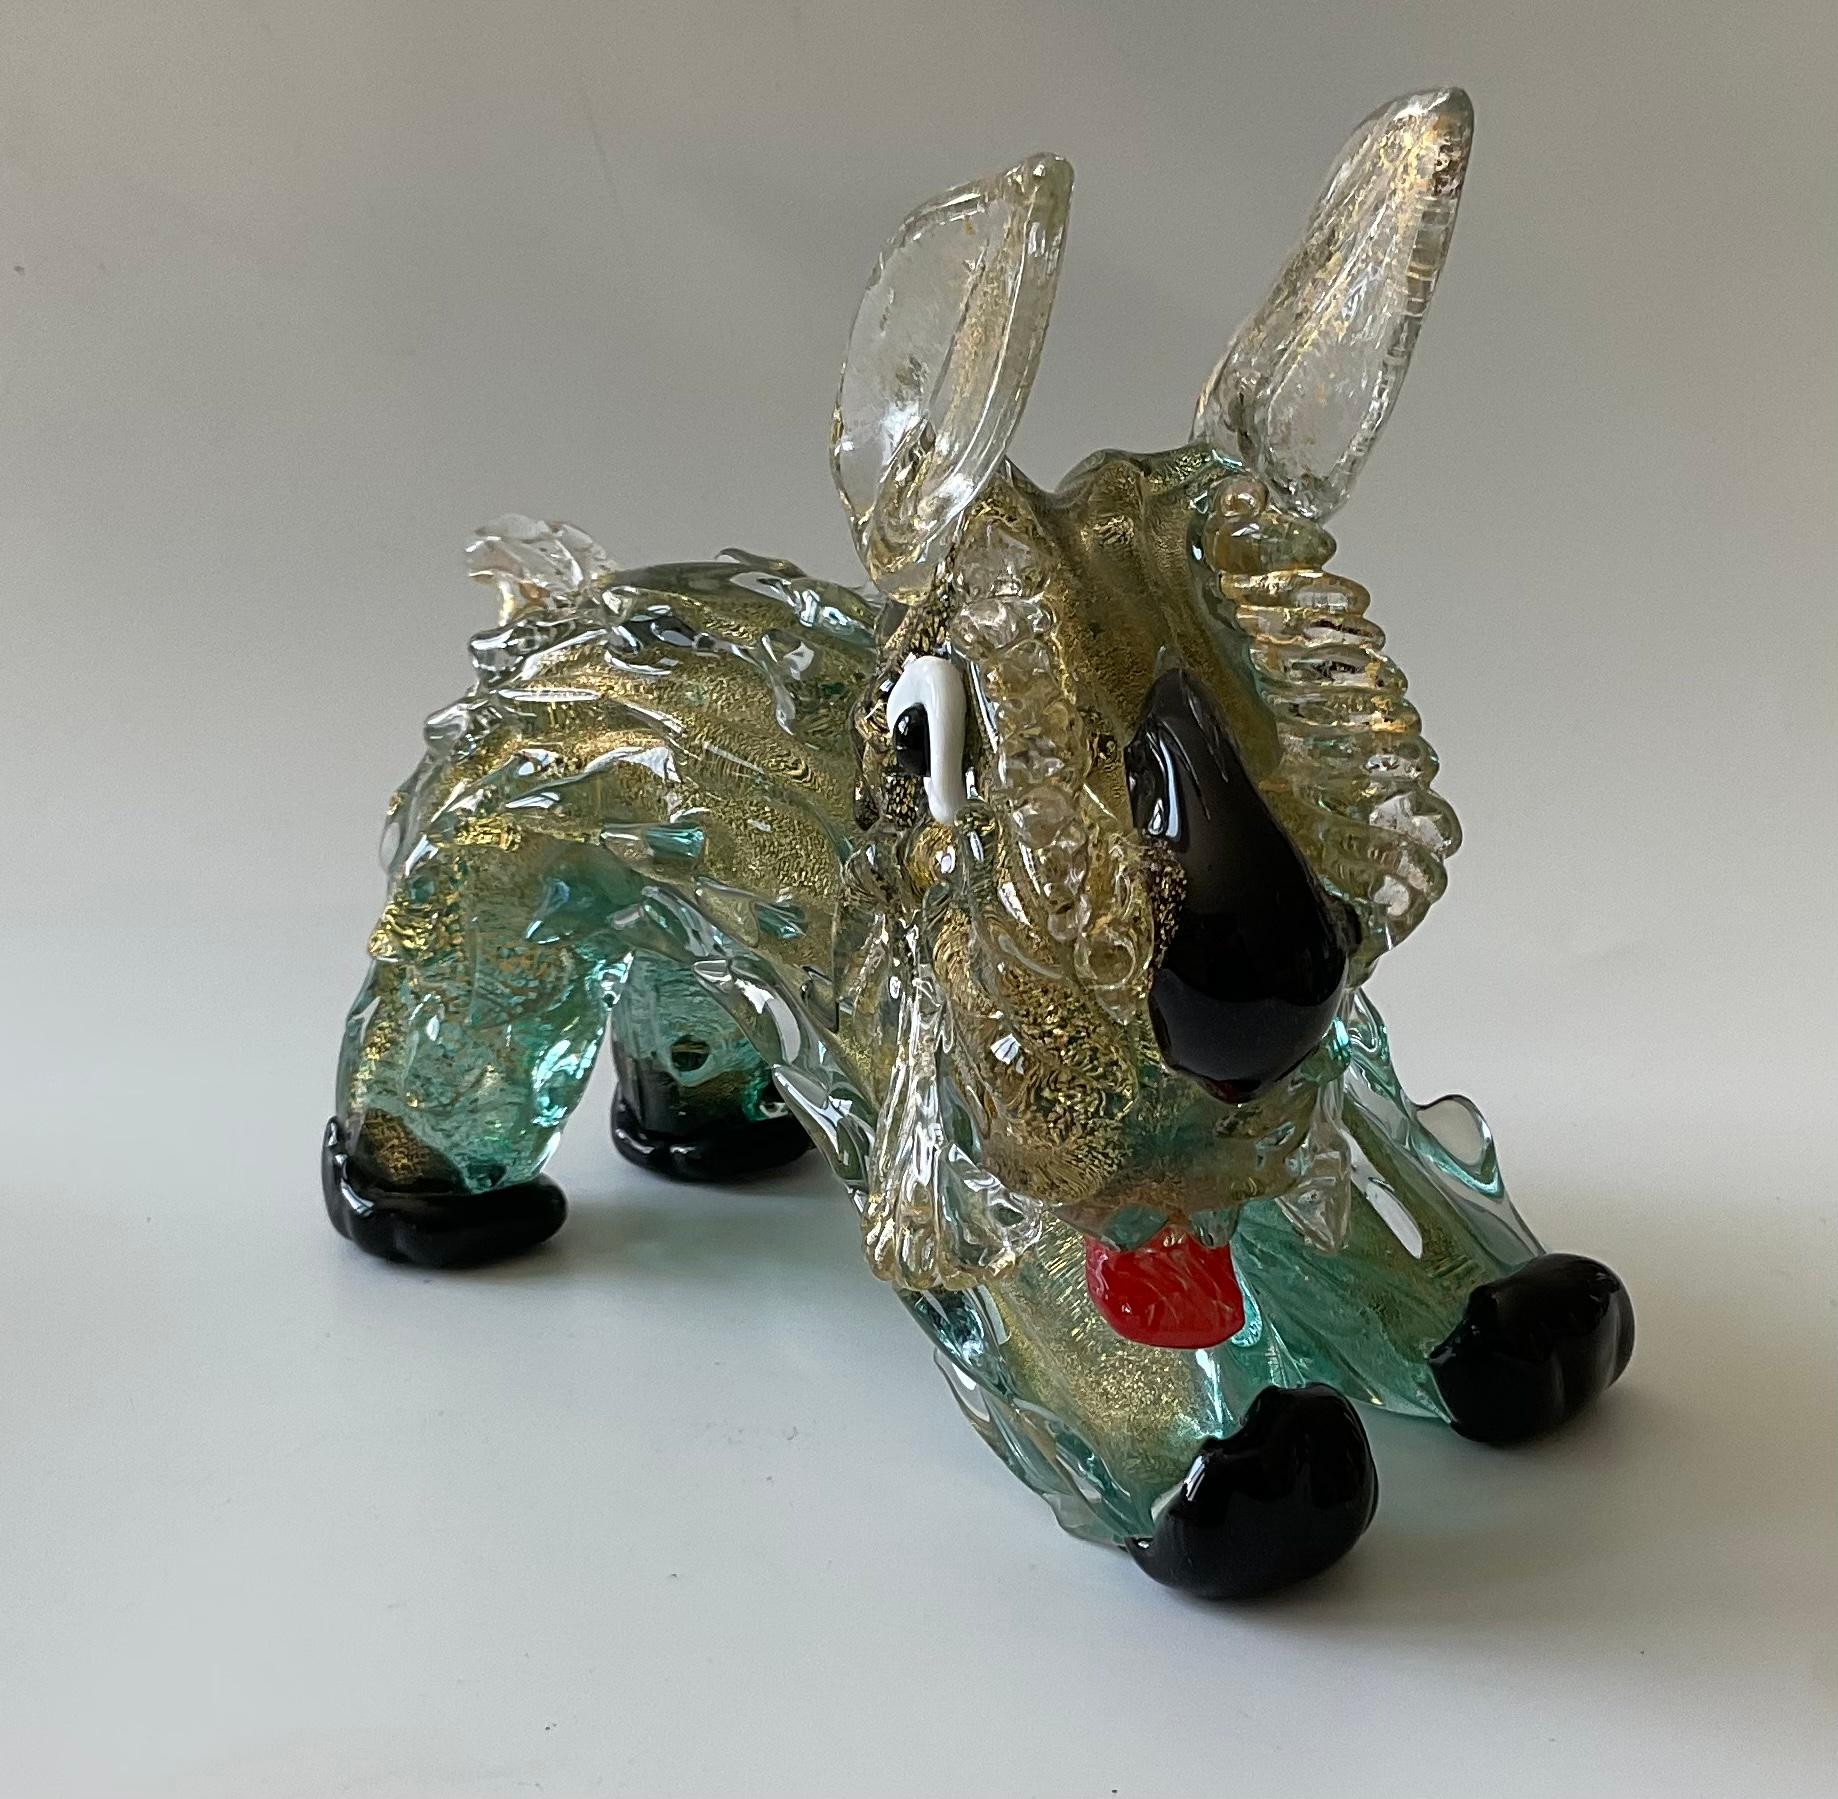 Ercole Barovier for Barovier and Toso Rare Murano glass sculpture of a dog In vibrant green glass with gold dust. Amazing detail and movement. 

The nearly fifty year tenure of Ercole Barovier as artistic director, designer and owner of Barovier &